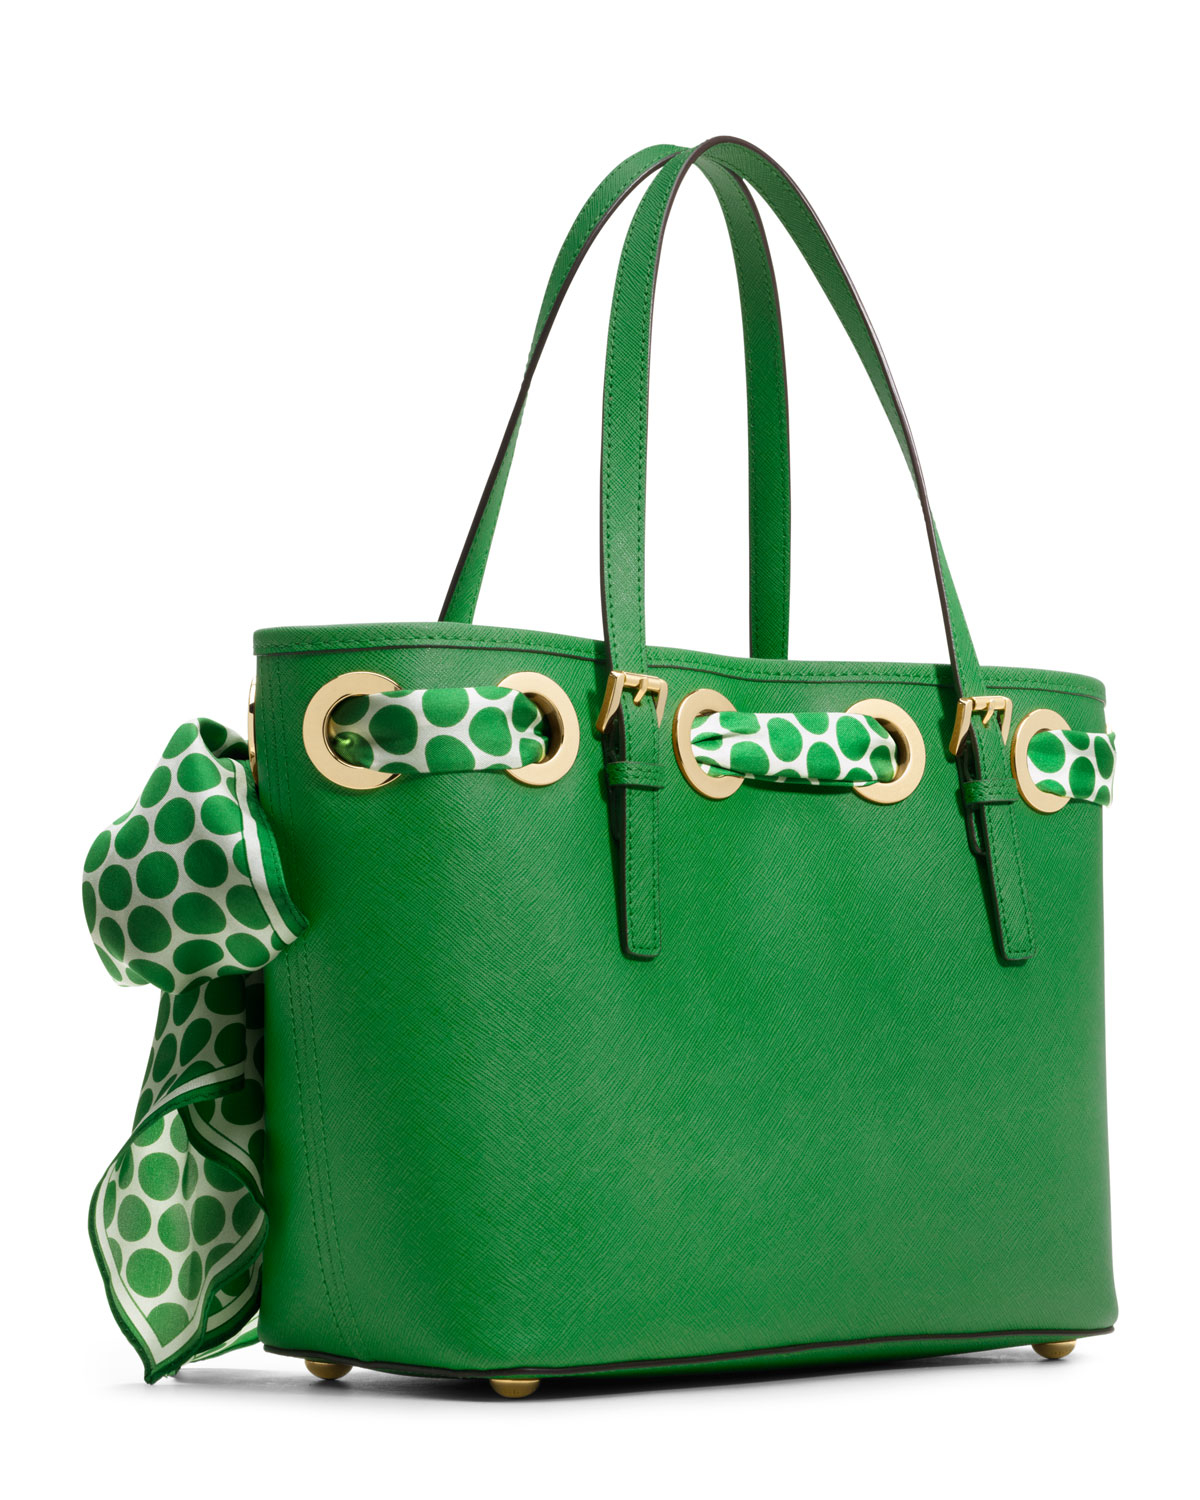 Michael Kors Small Jet Set Scarf Tote in Green | Lyst